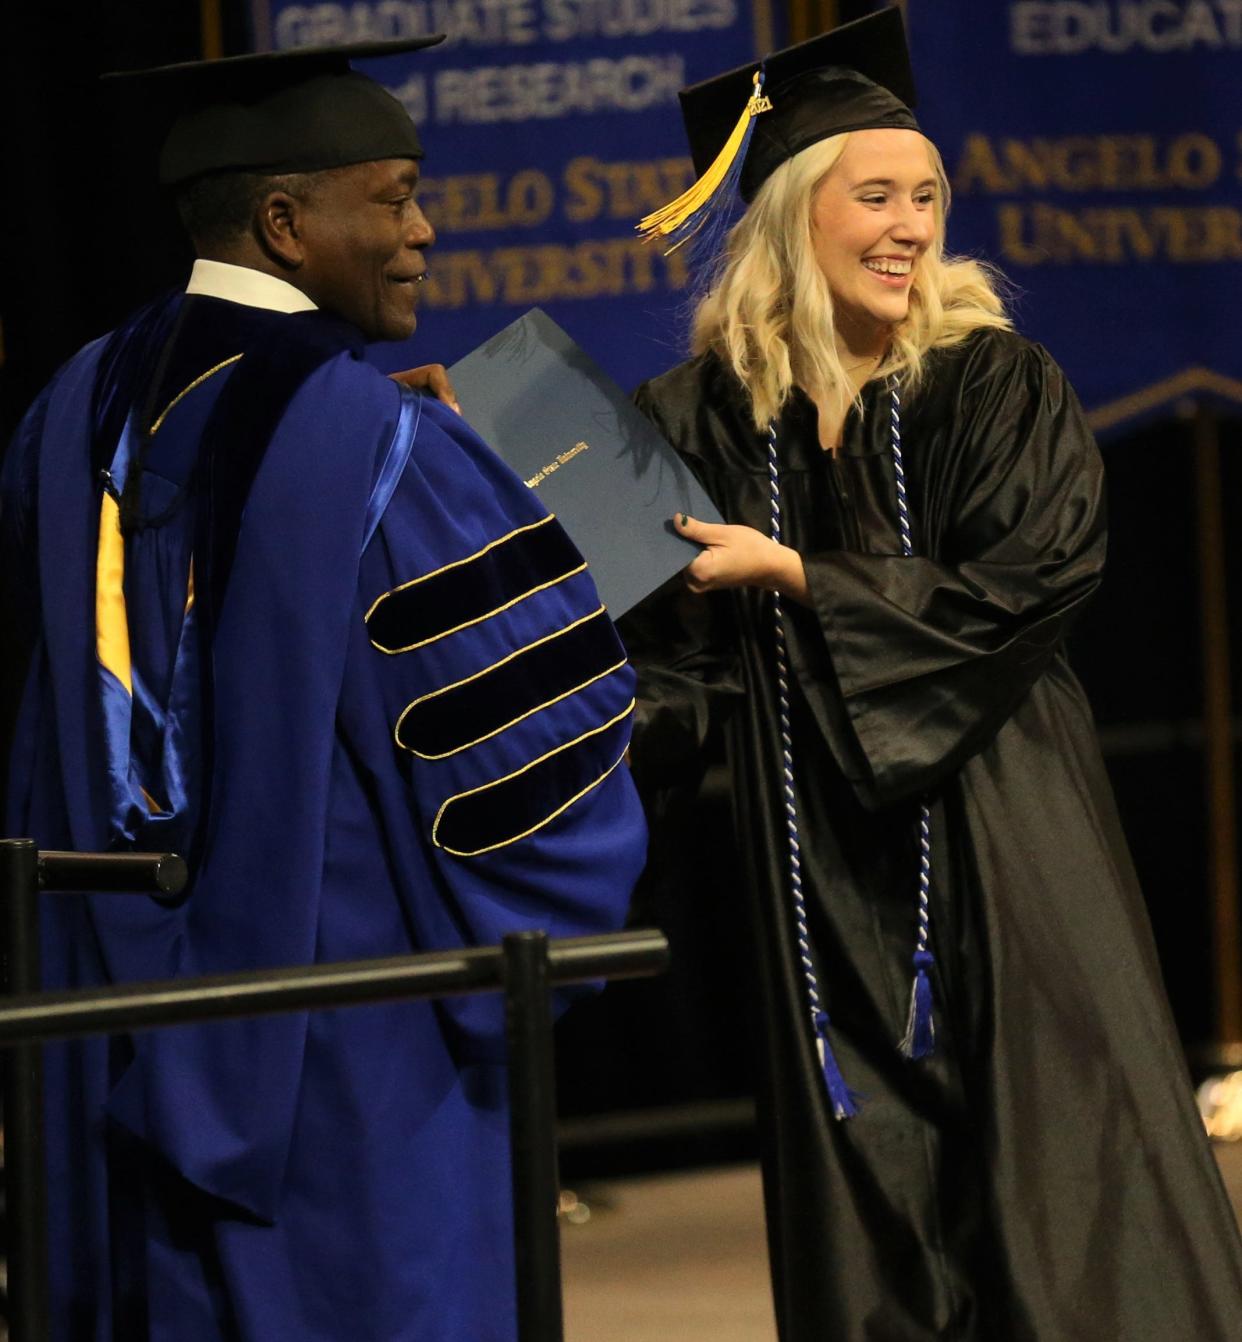 Angelo State University President Ronnie Hawkins hands a diploma to a graduate during fall commencement ceremonies at the Junell Center on Dec. 11, 2021.